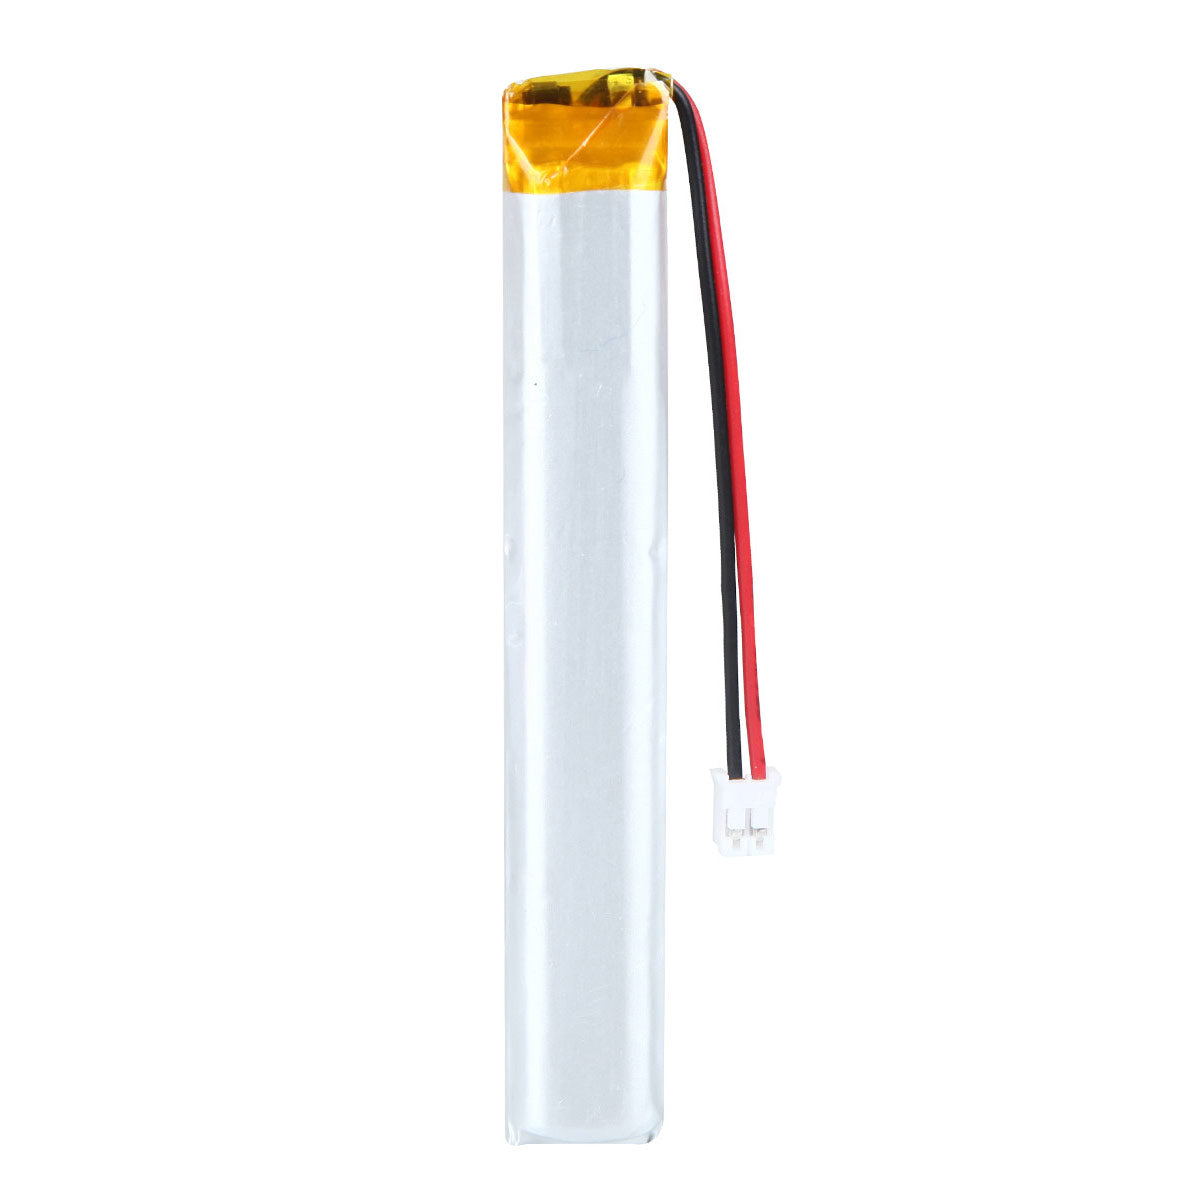 3.7V 701488 850mAh Rechargeable Lithium Polymer Battery